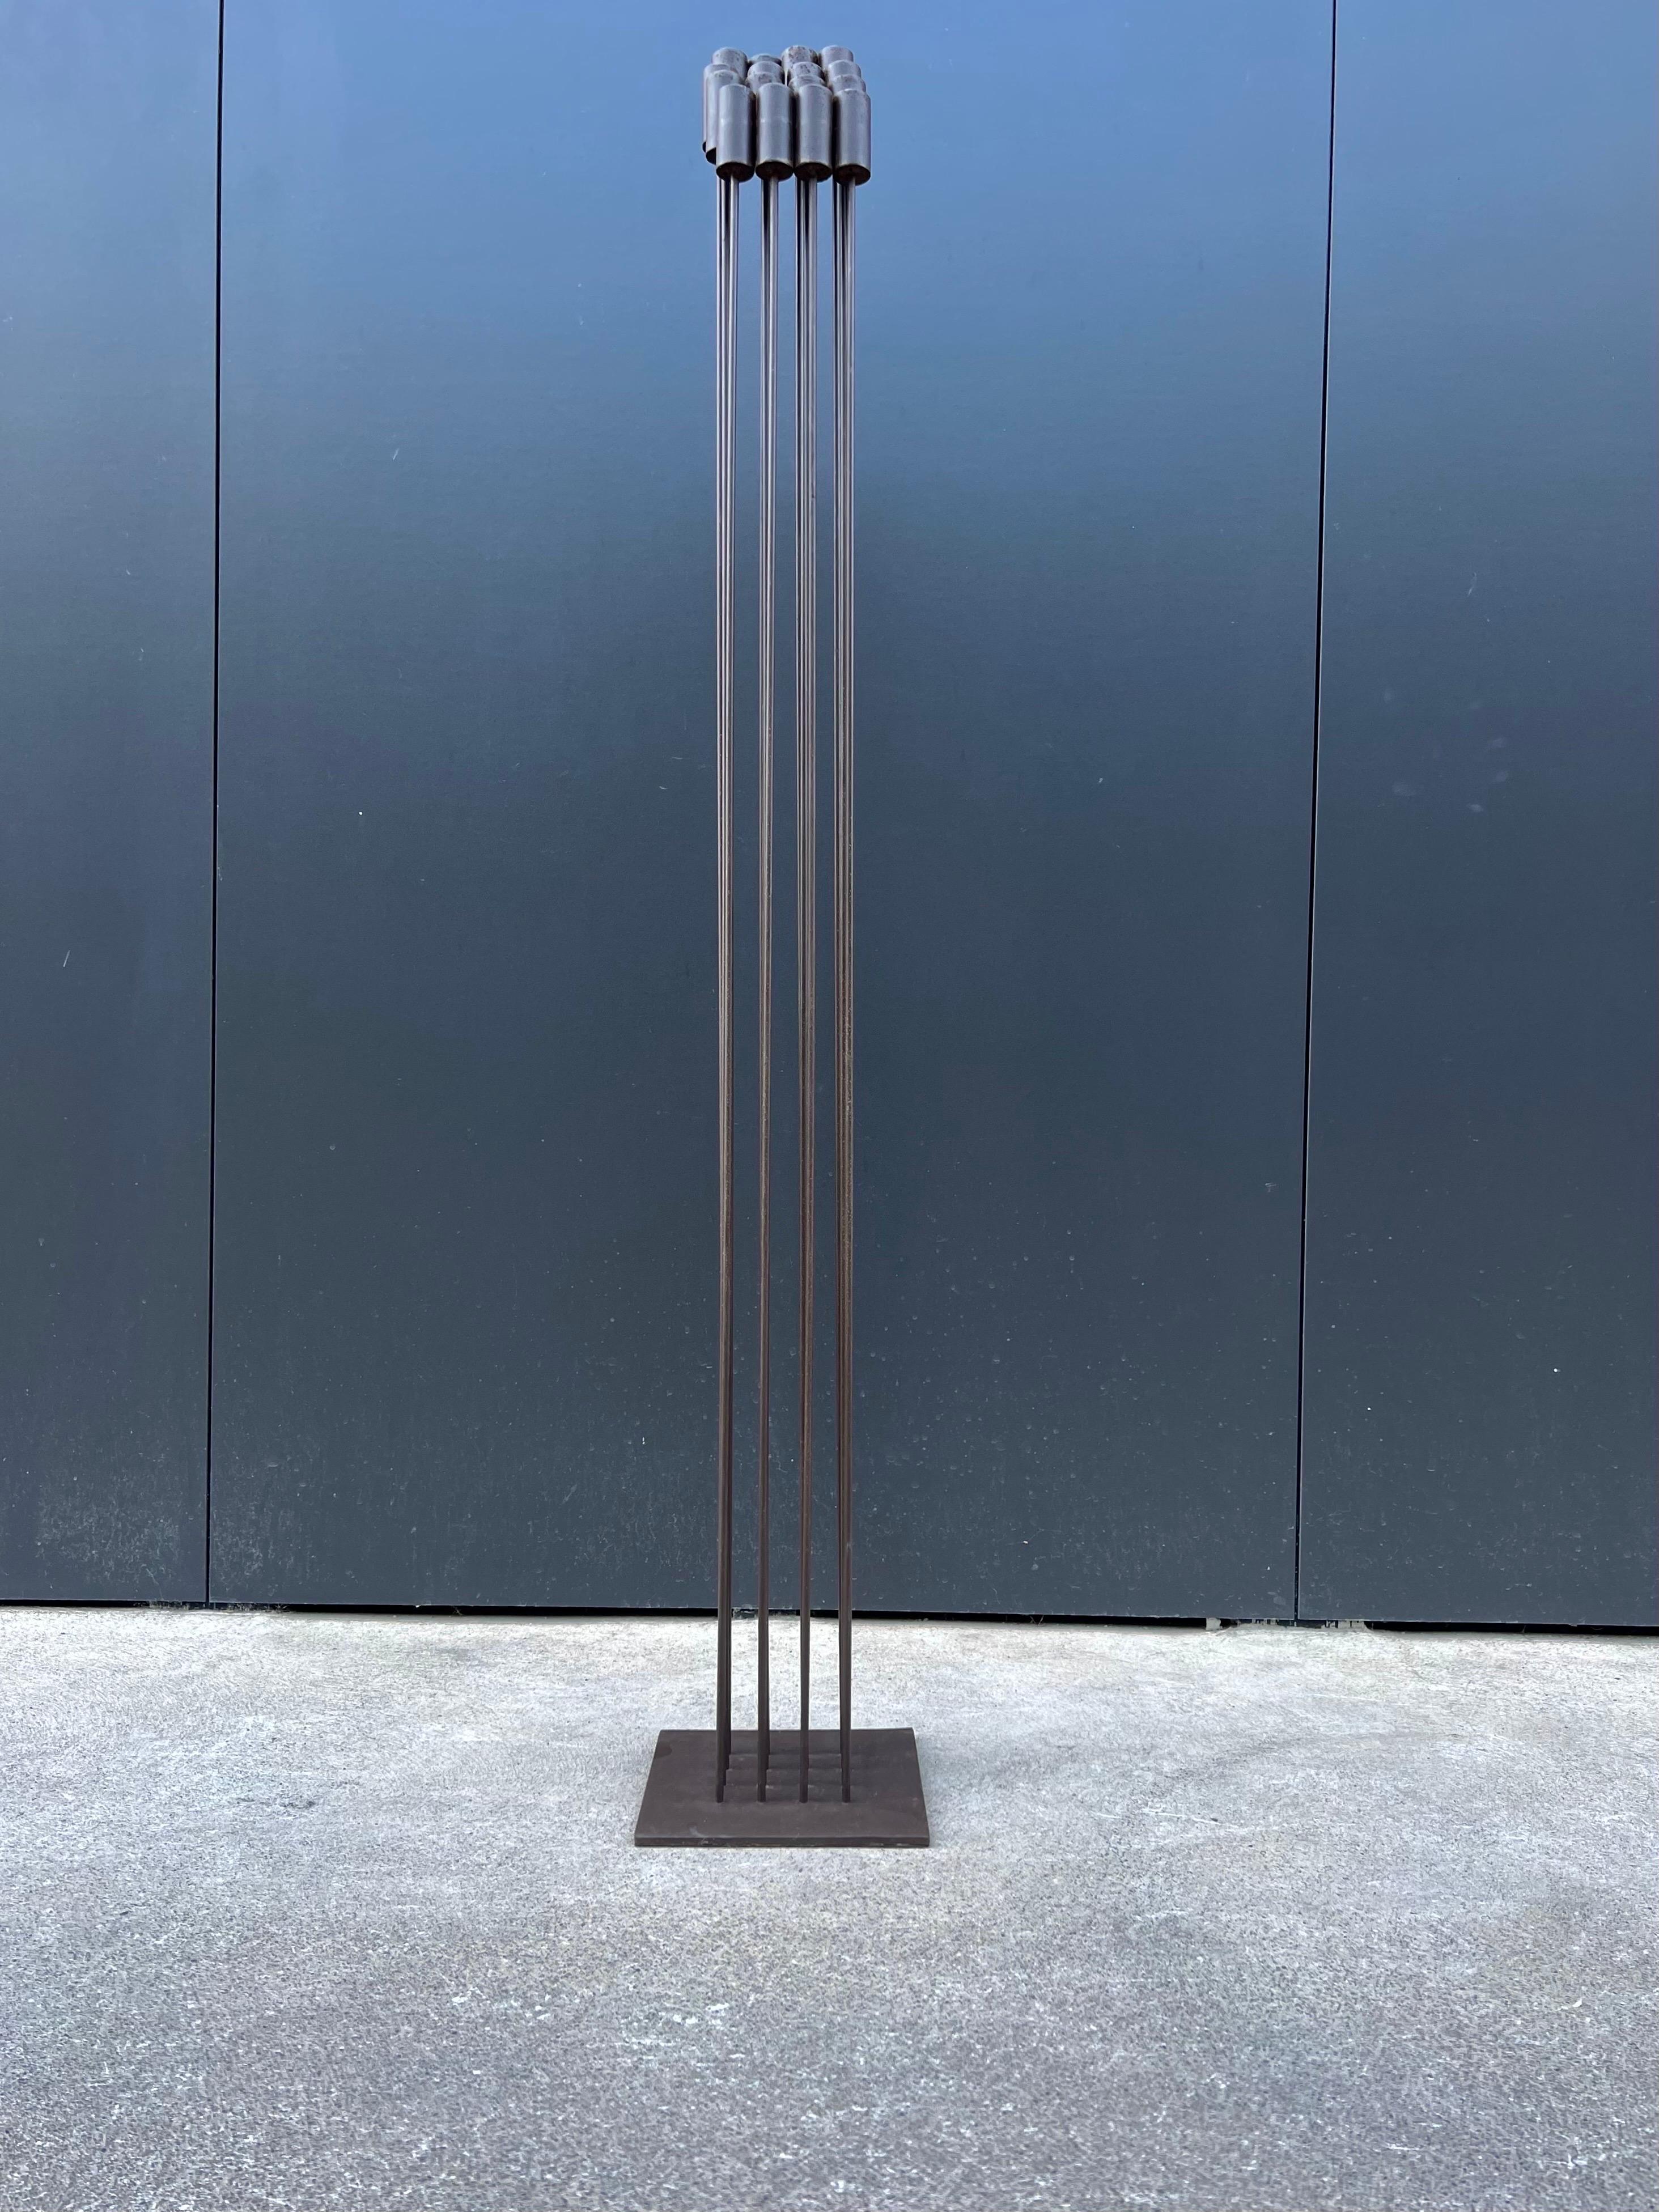 Vintage Sonambient cattails sound sculpture in the manner of Harry Bertoia circa 1970. It is in great vintage condition with patina throughout, four rows of four copper colored sound rods.